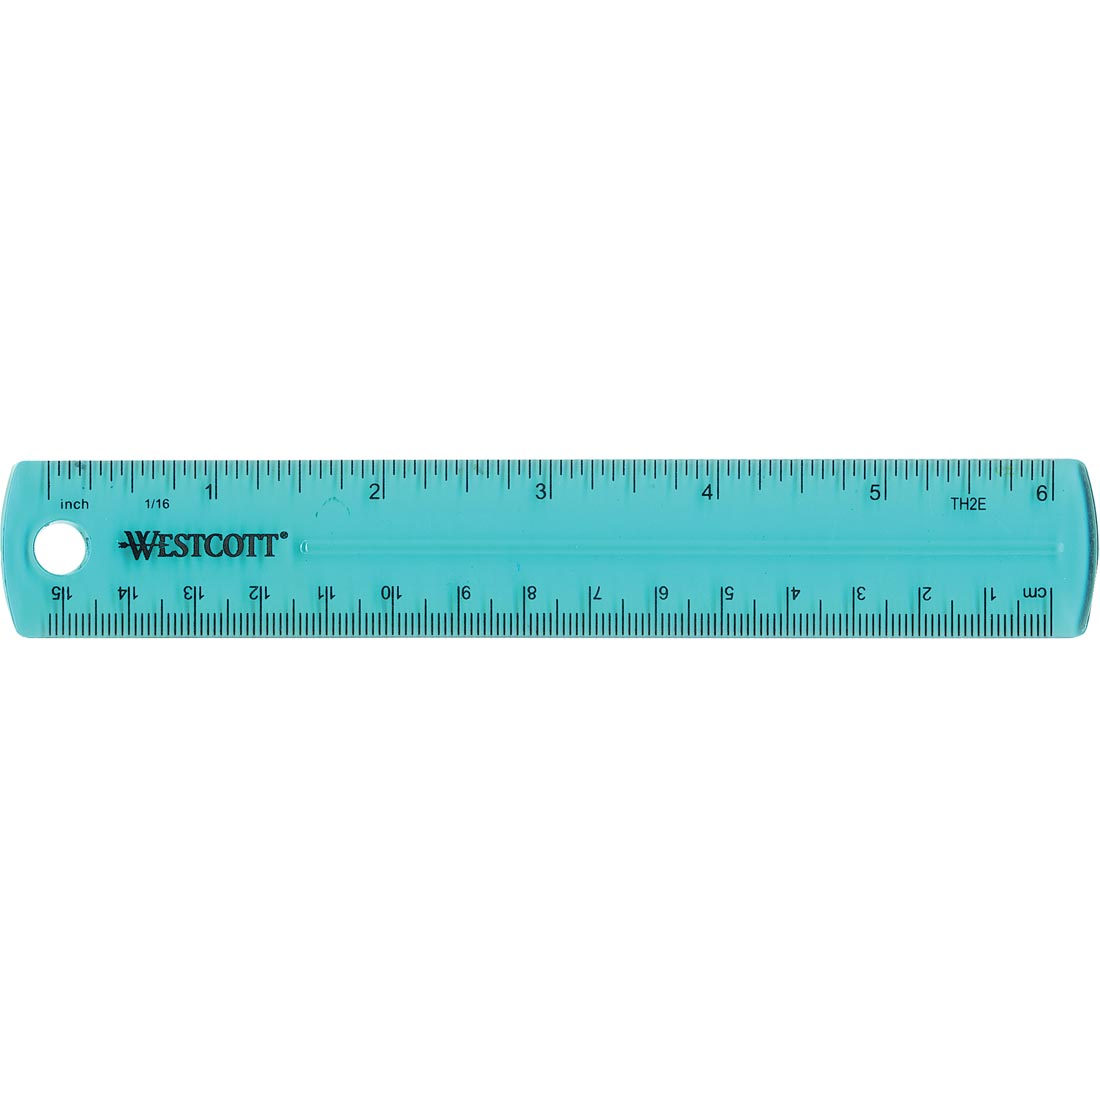 teal-colored ruler with a hole punched on one end